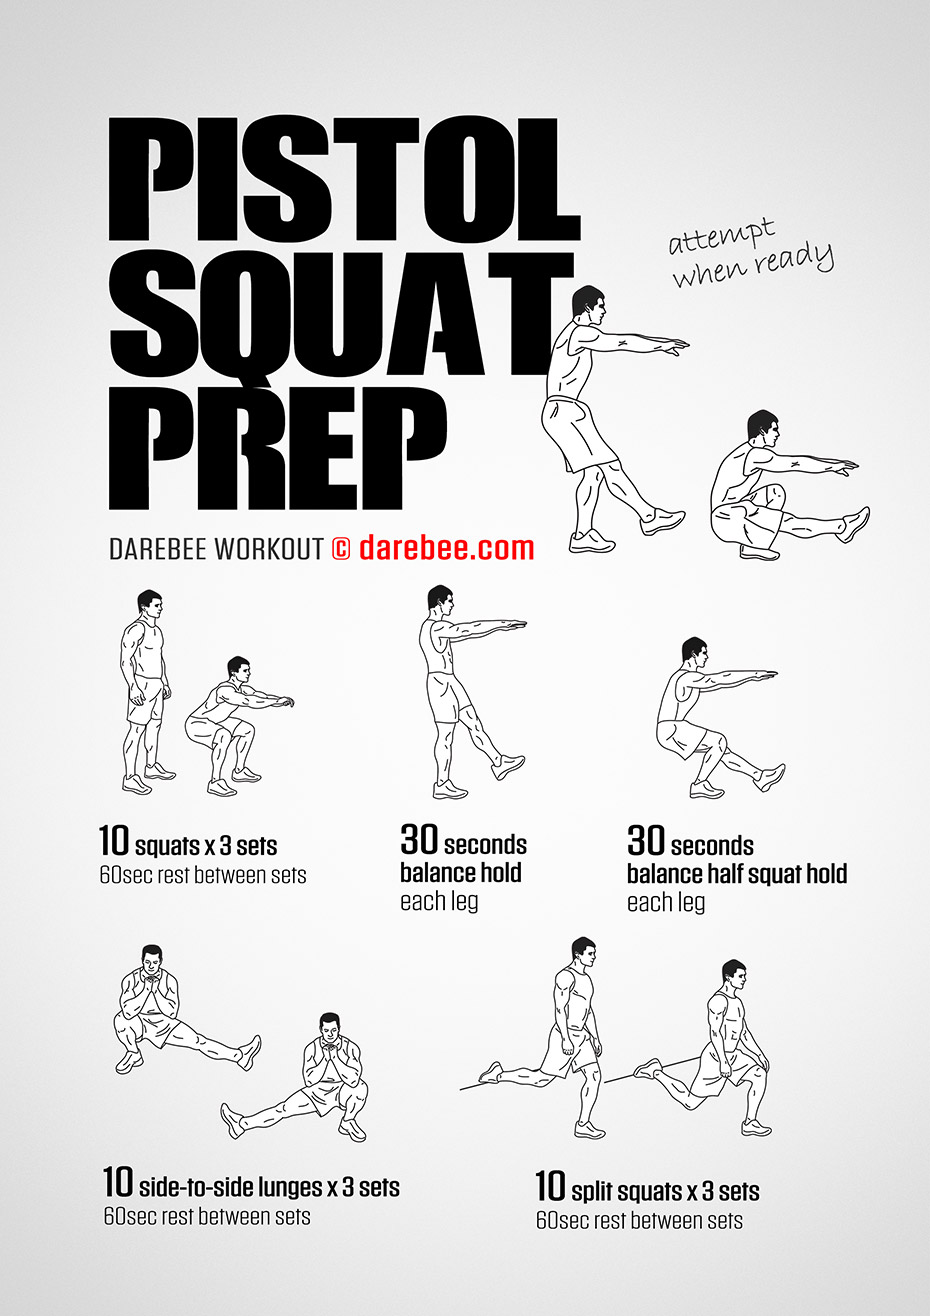 Learn How To Pistol Squat With [P]rehab Exercises!